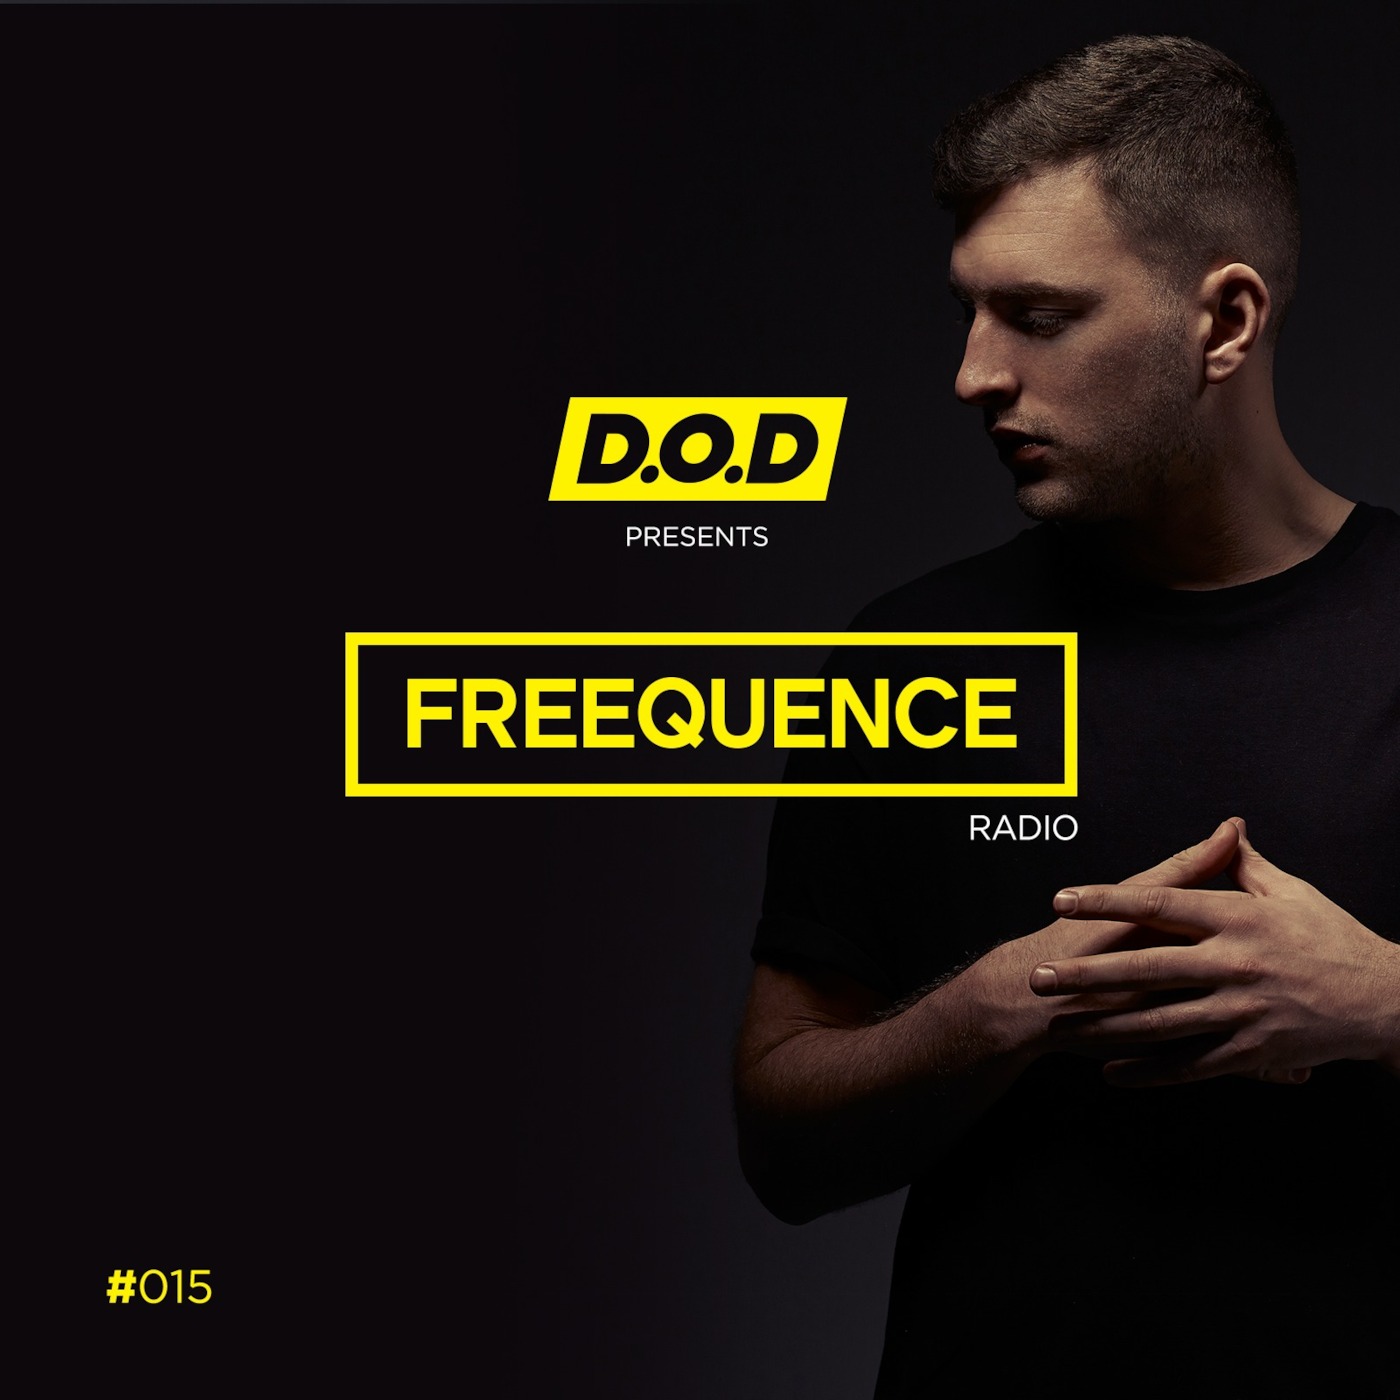 #FREEQUENCE Radio with D.O.D #015